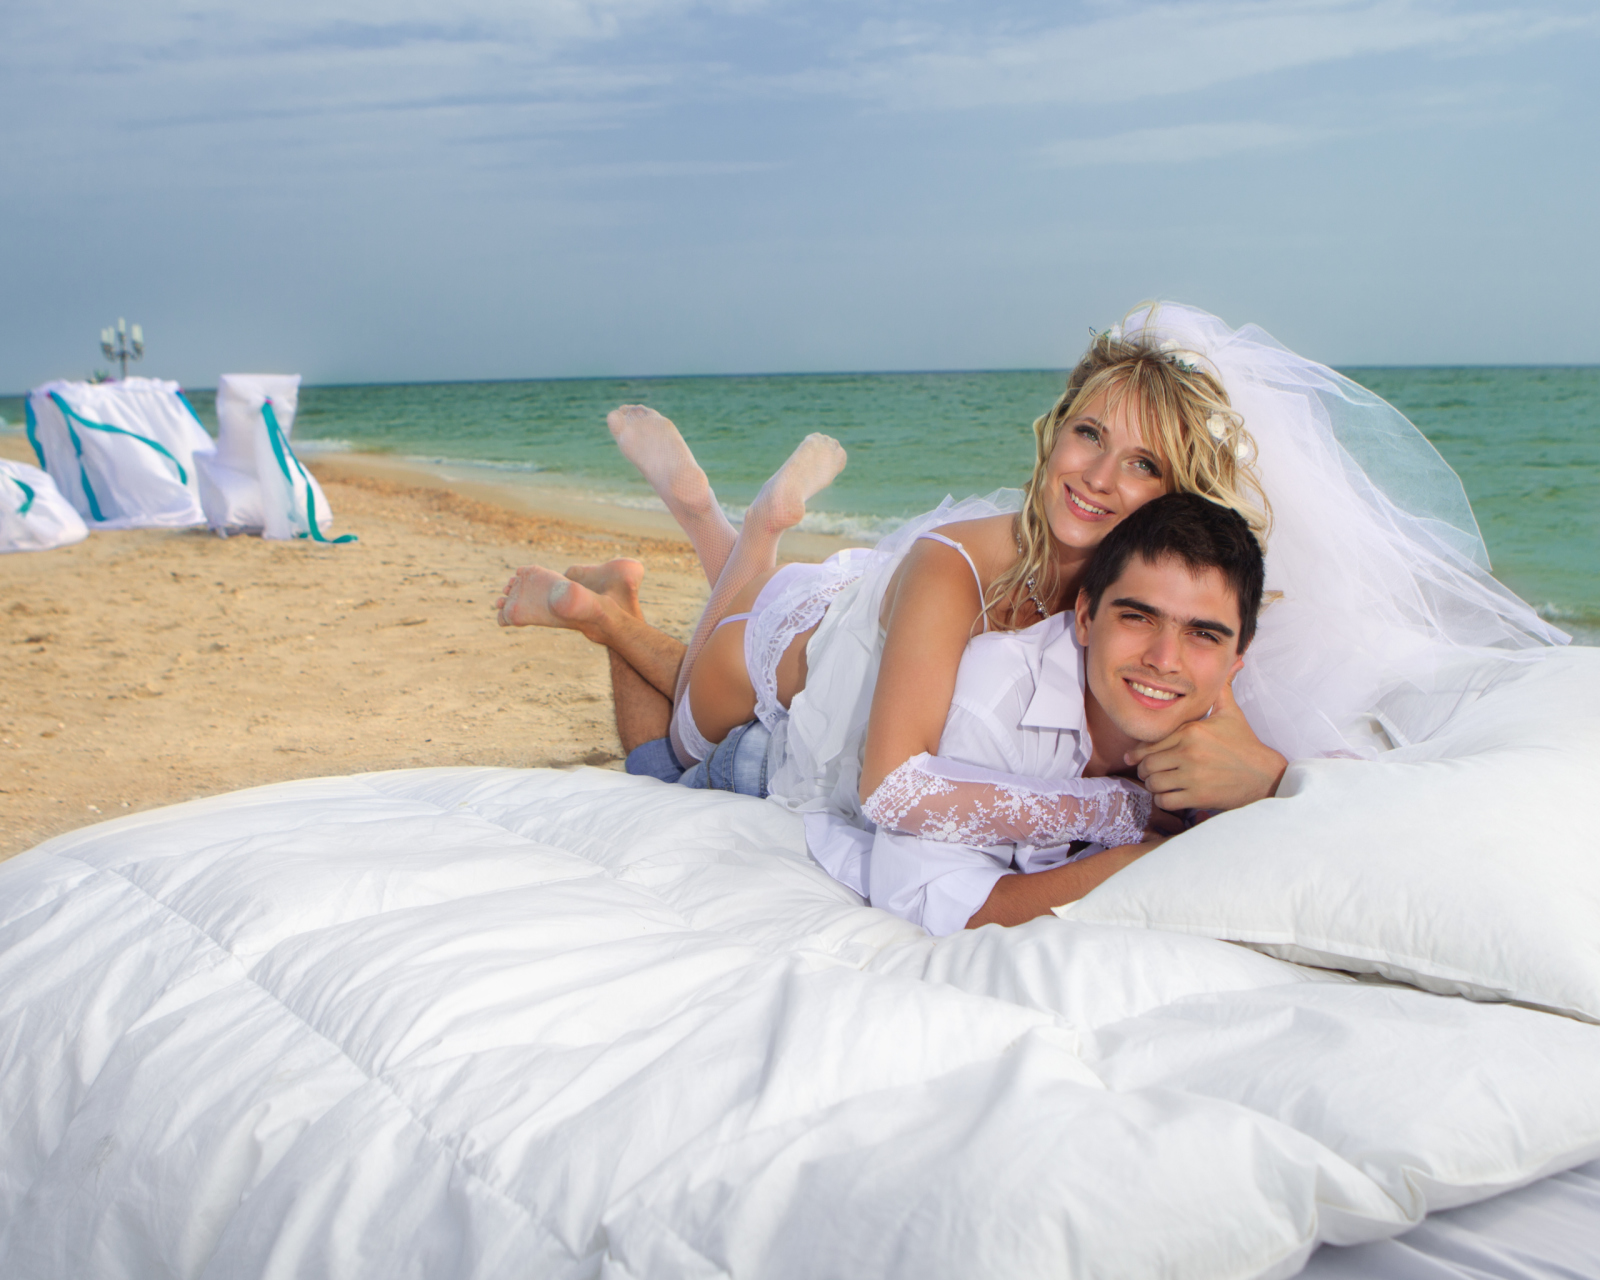 Just Married On Beach wallpaper 1600x1280